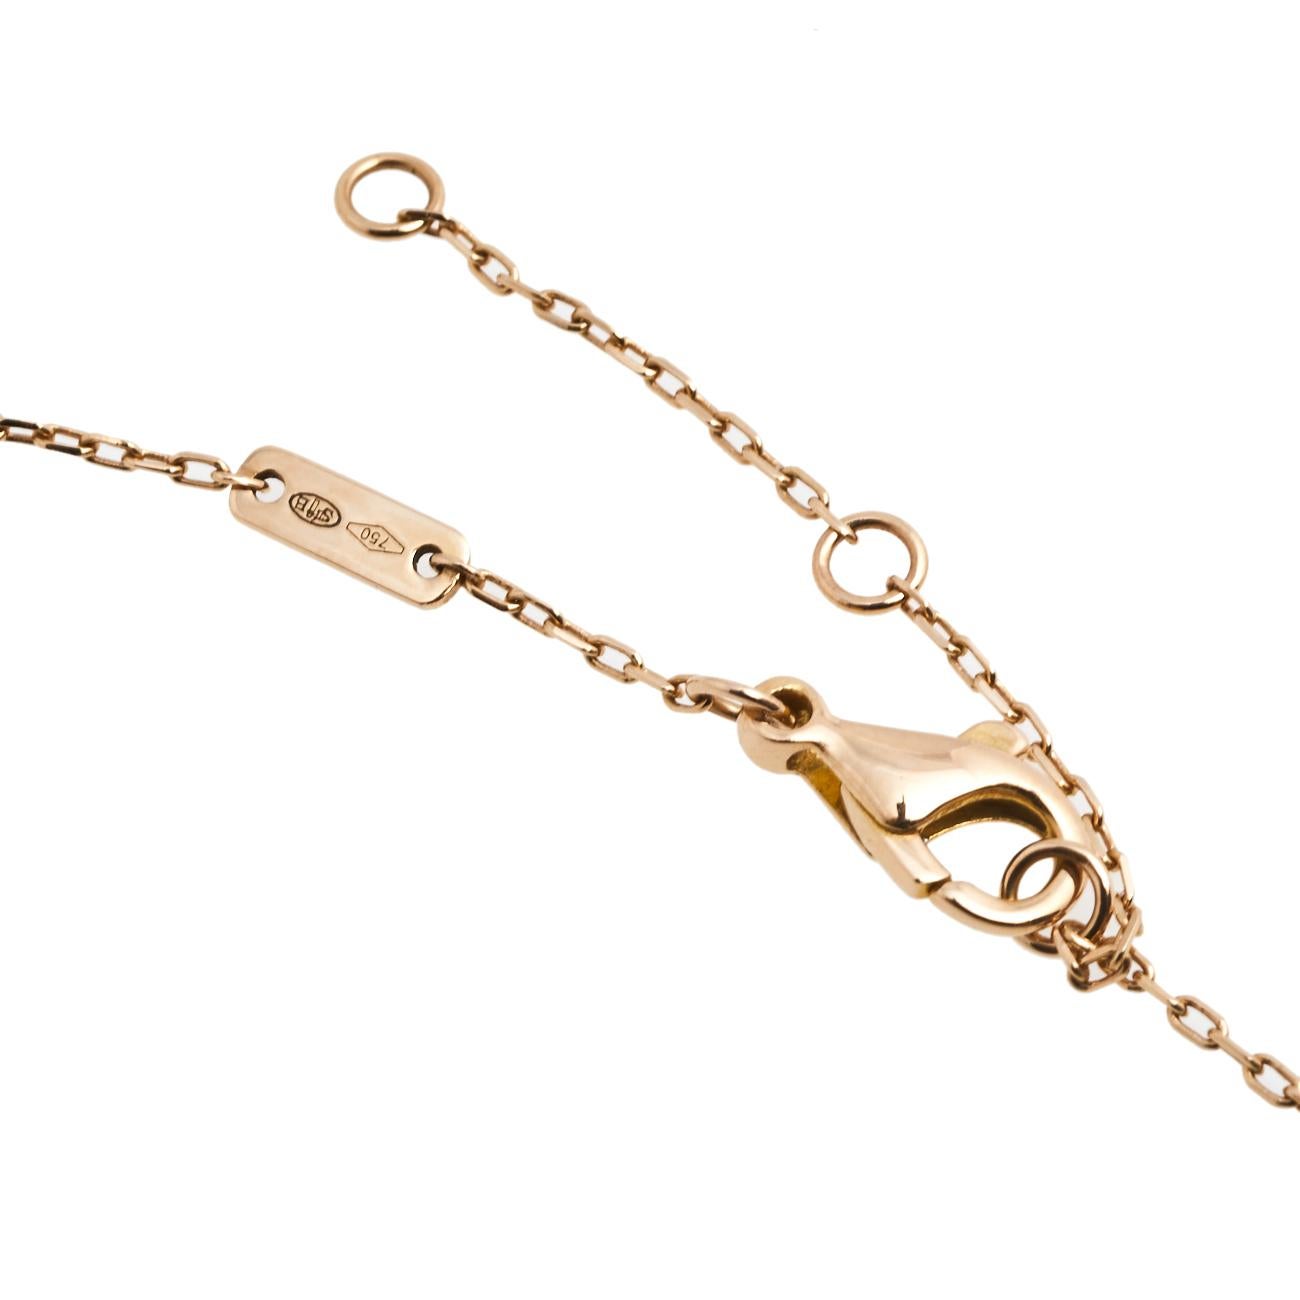 This incredible necklace from Boucheron's Plume de Paon collection has been created by Maison's skilled craftsmen with such precision that every line and curve is smoothened to perfection. The necklace is sculpted using 18k rose gold and the chain,